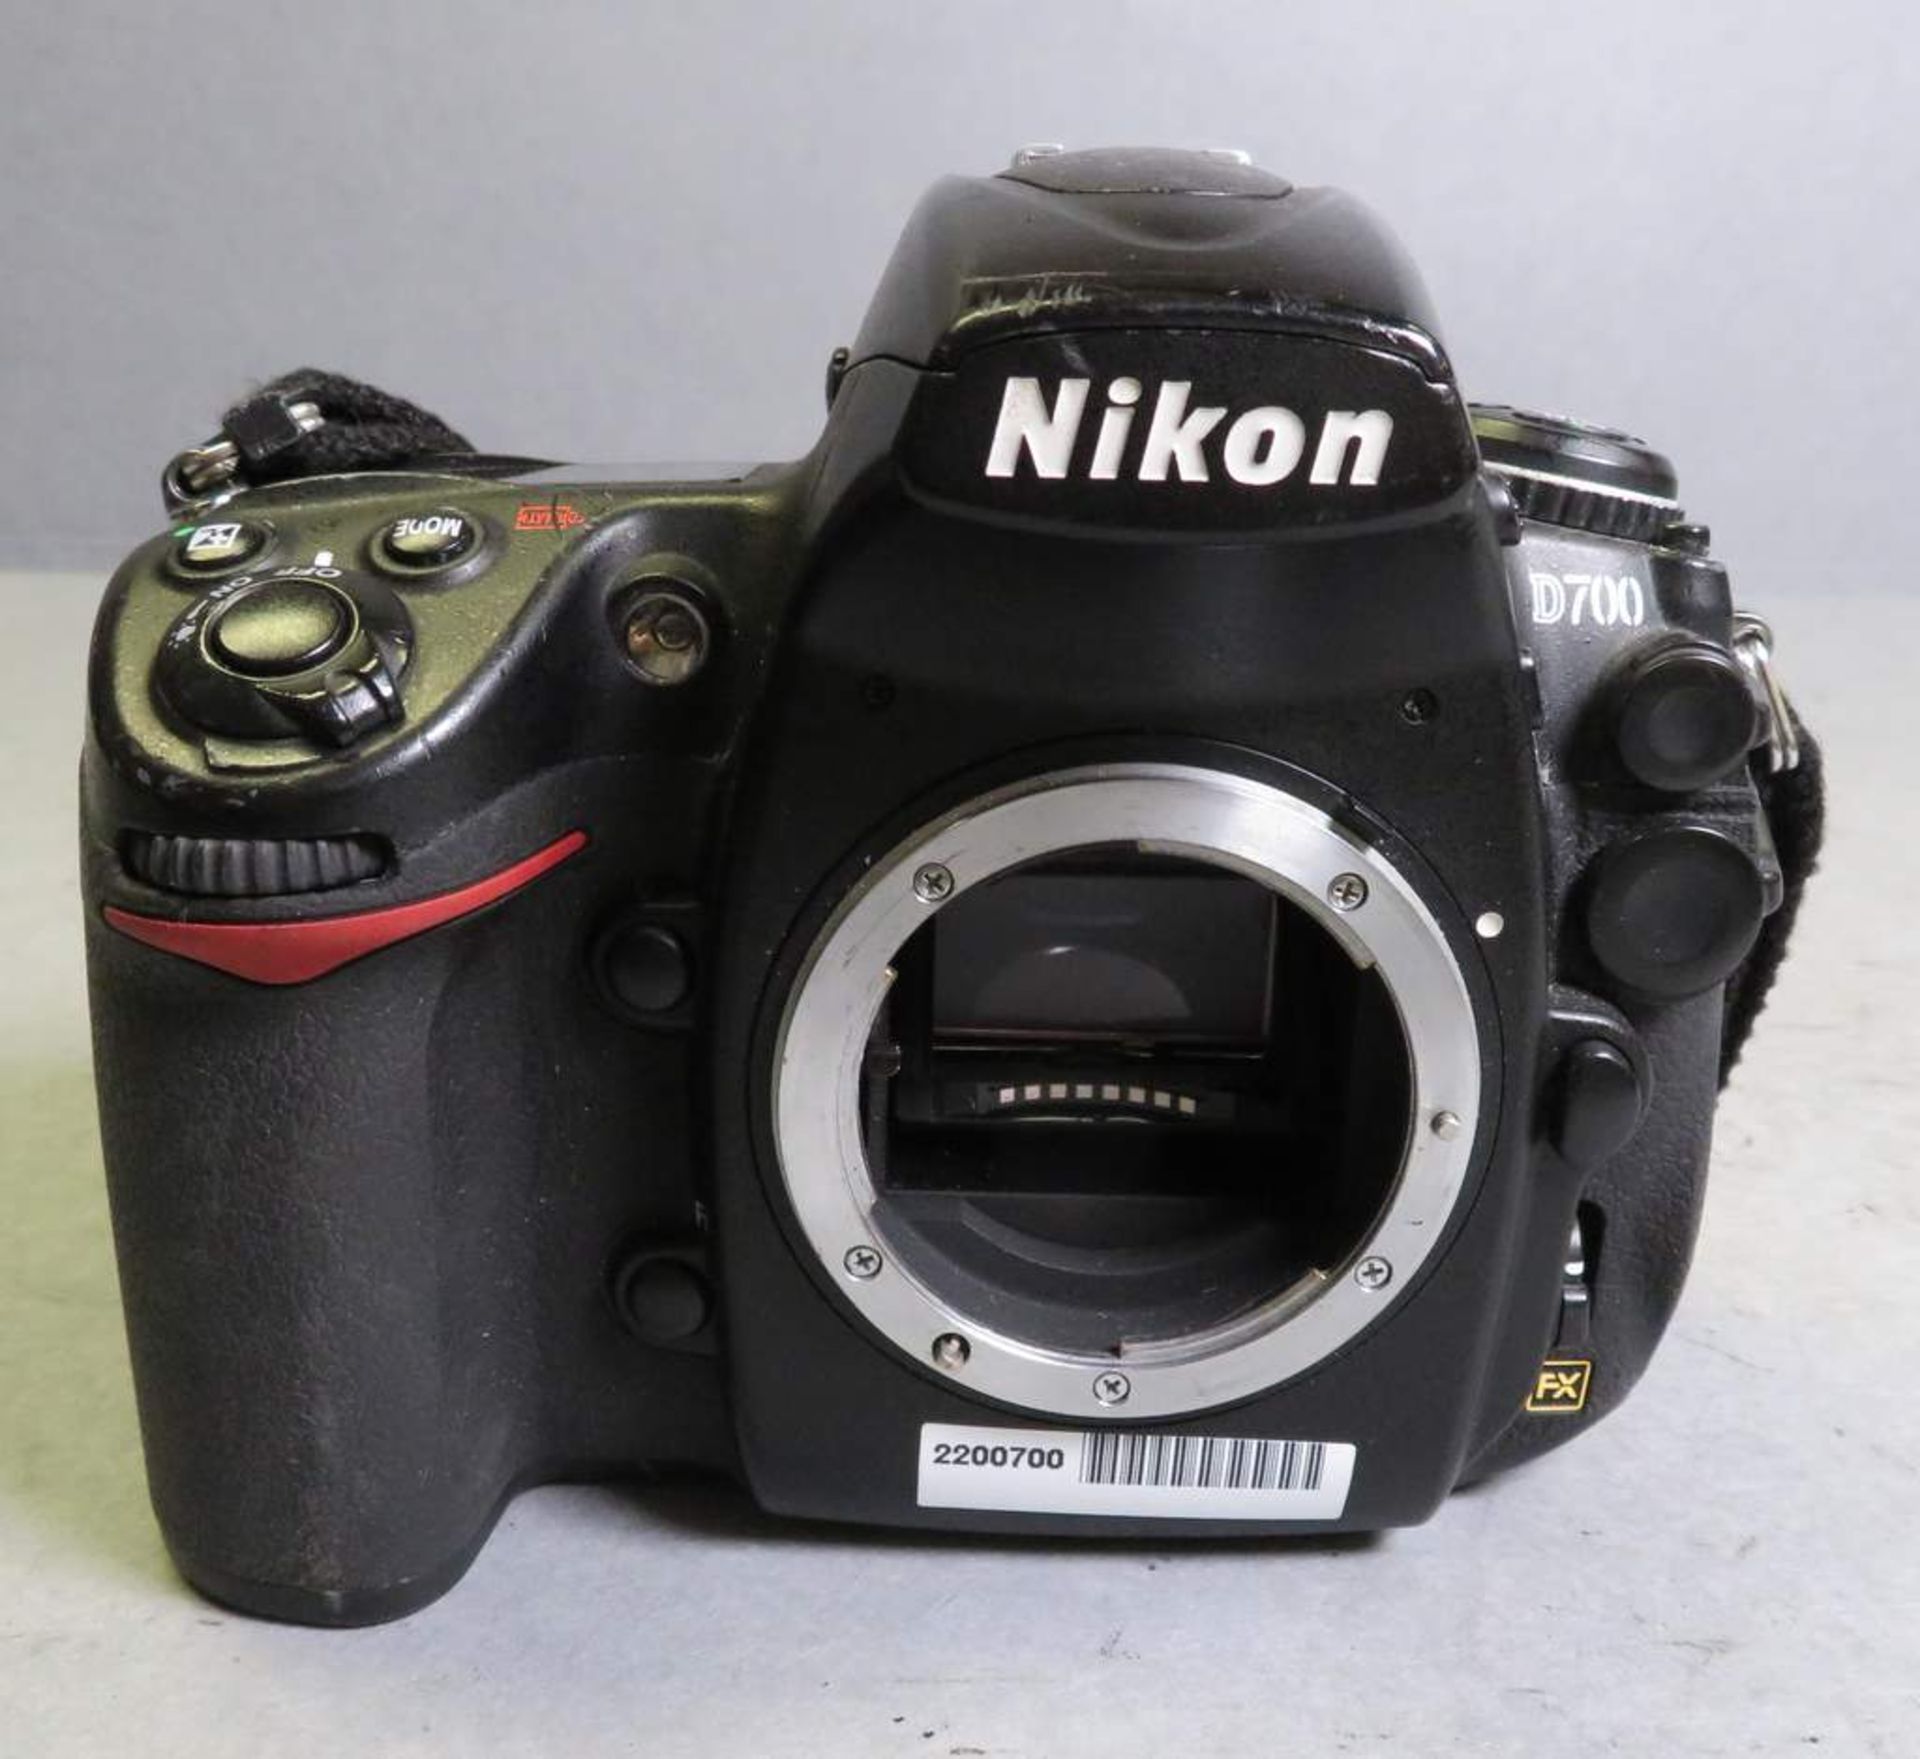 Nikon D700 Camera body - no battery or accessories - Image 4 of 6